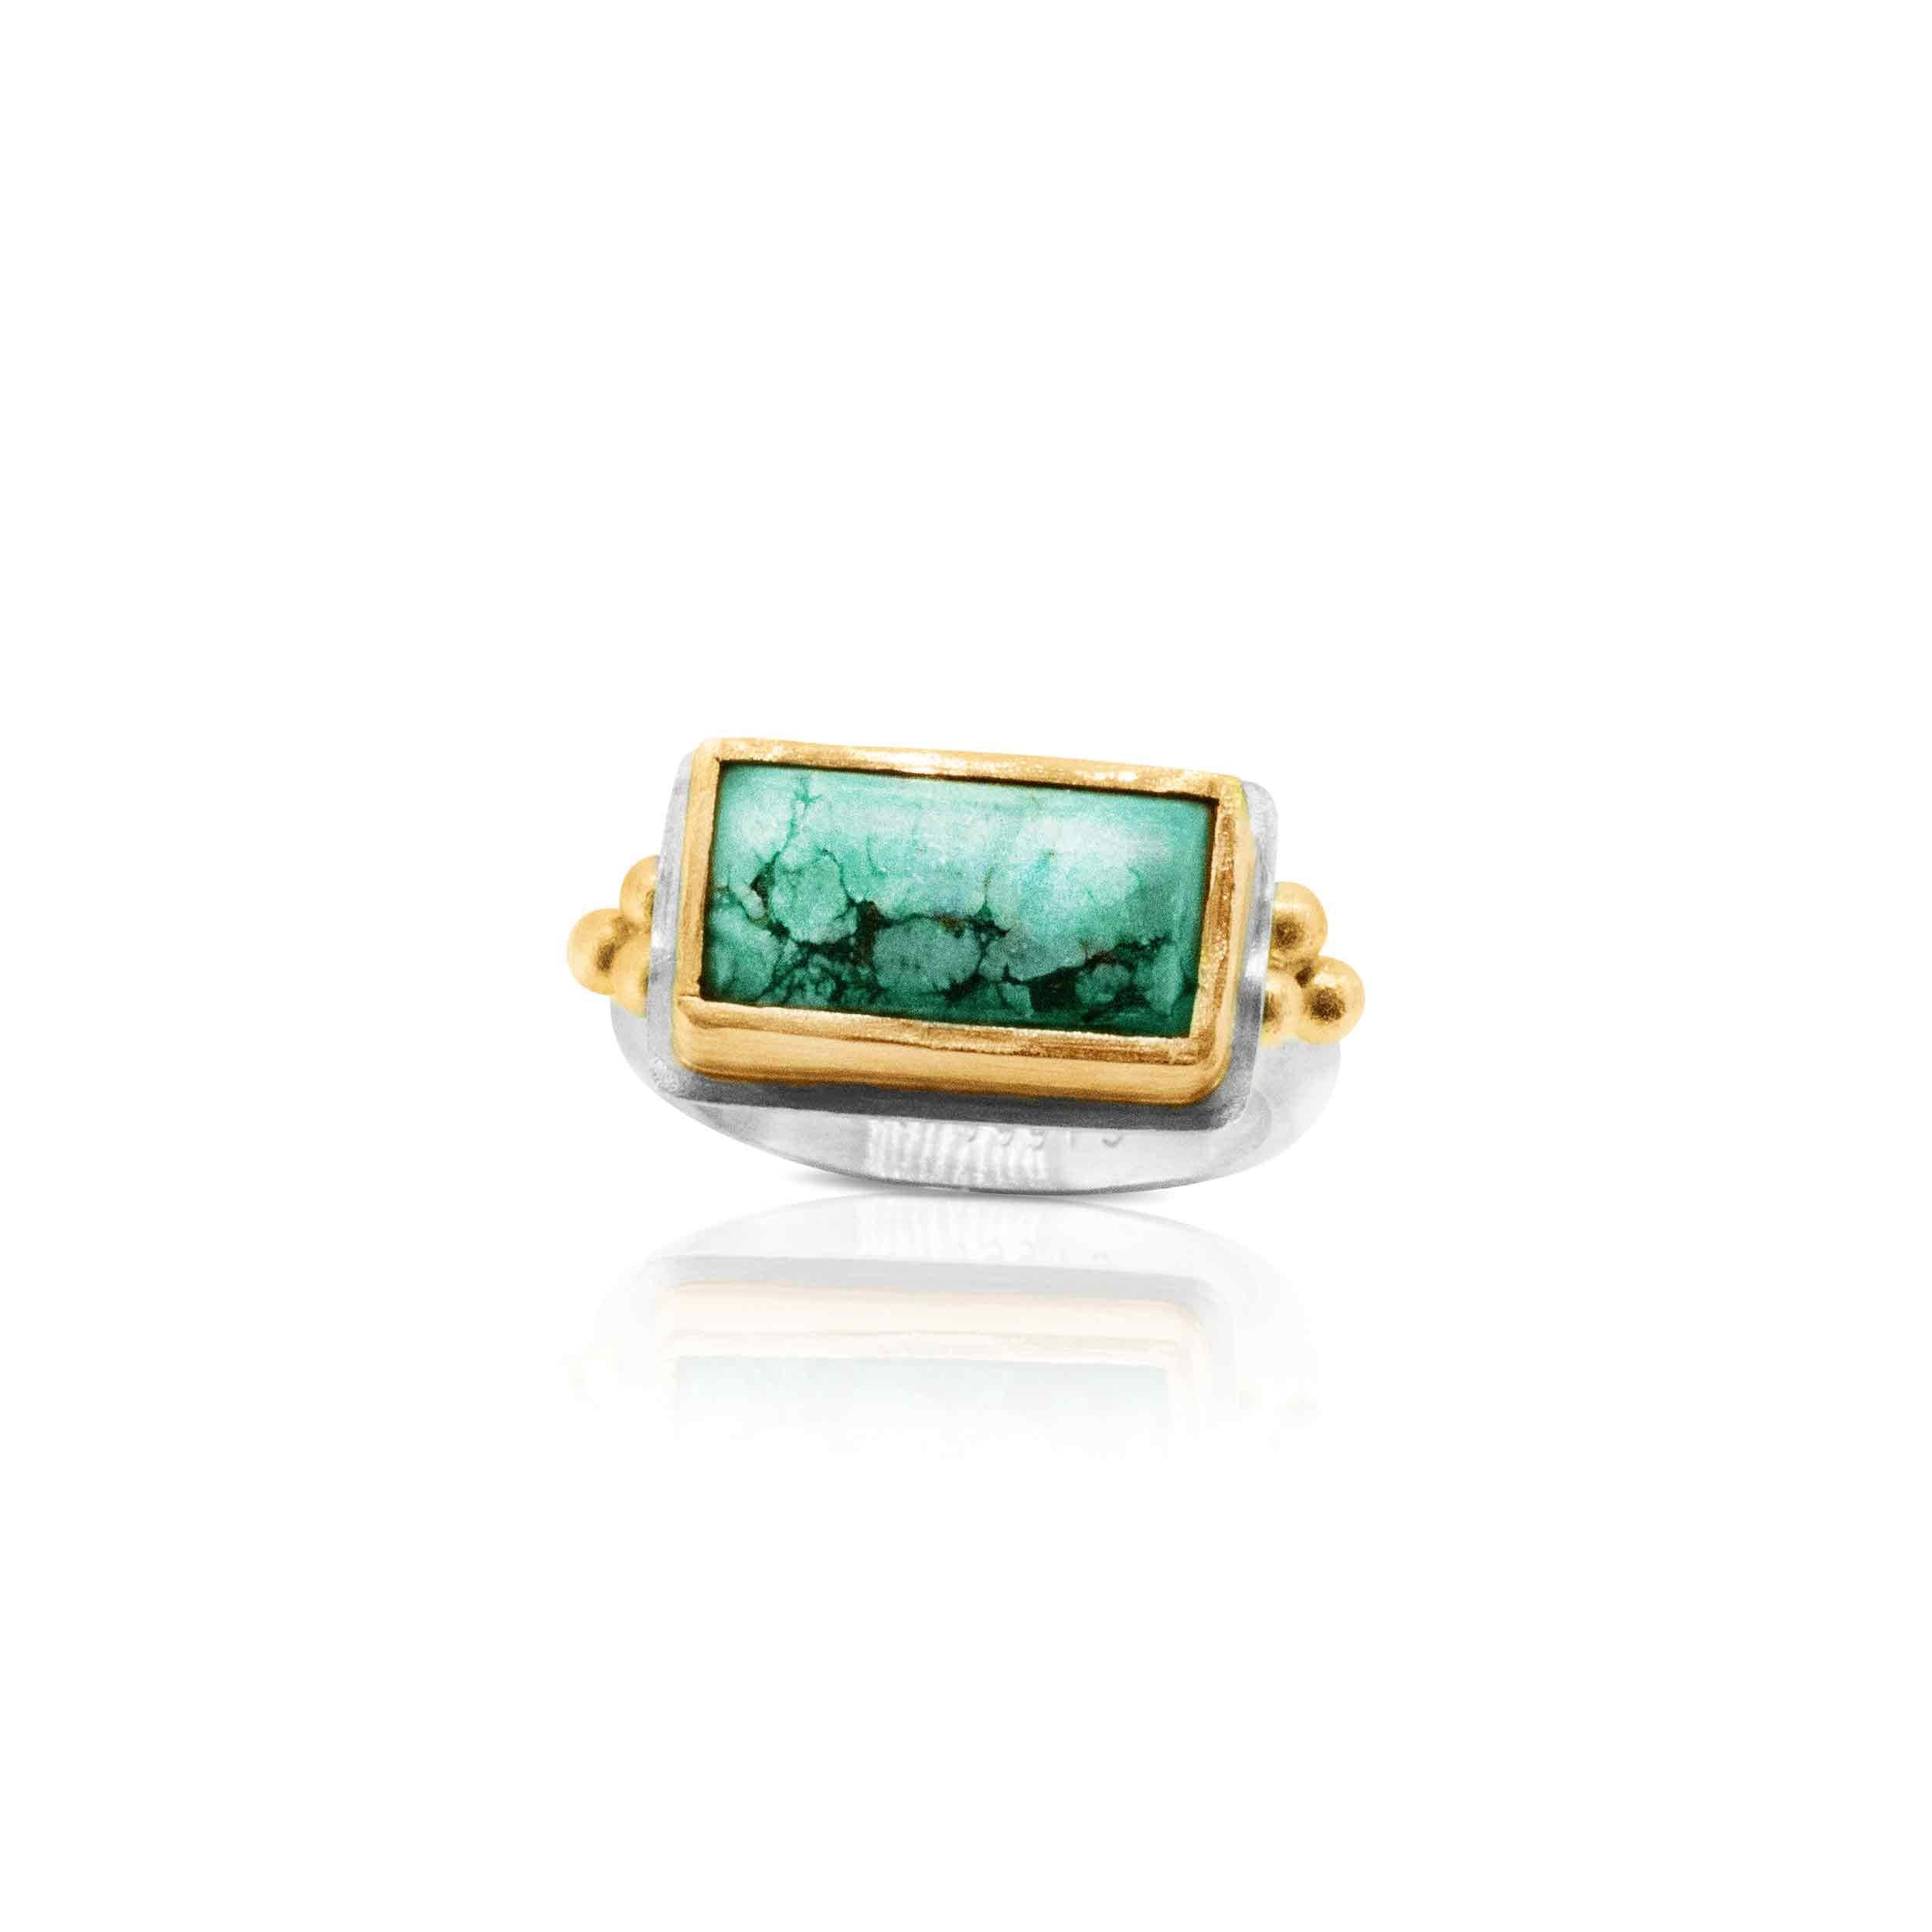 Buy New Mexico Sky - Turquoise Ring with Granulation at Nancy Troske ...